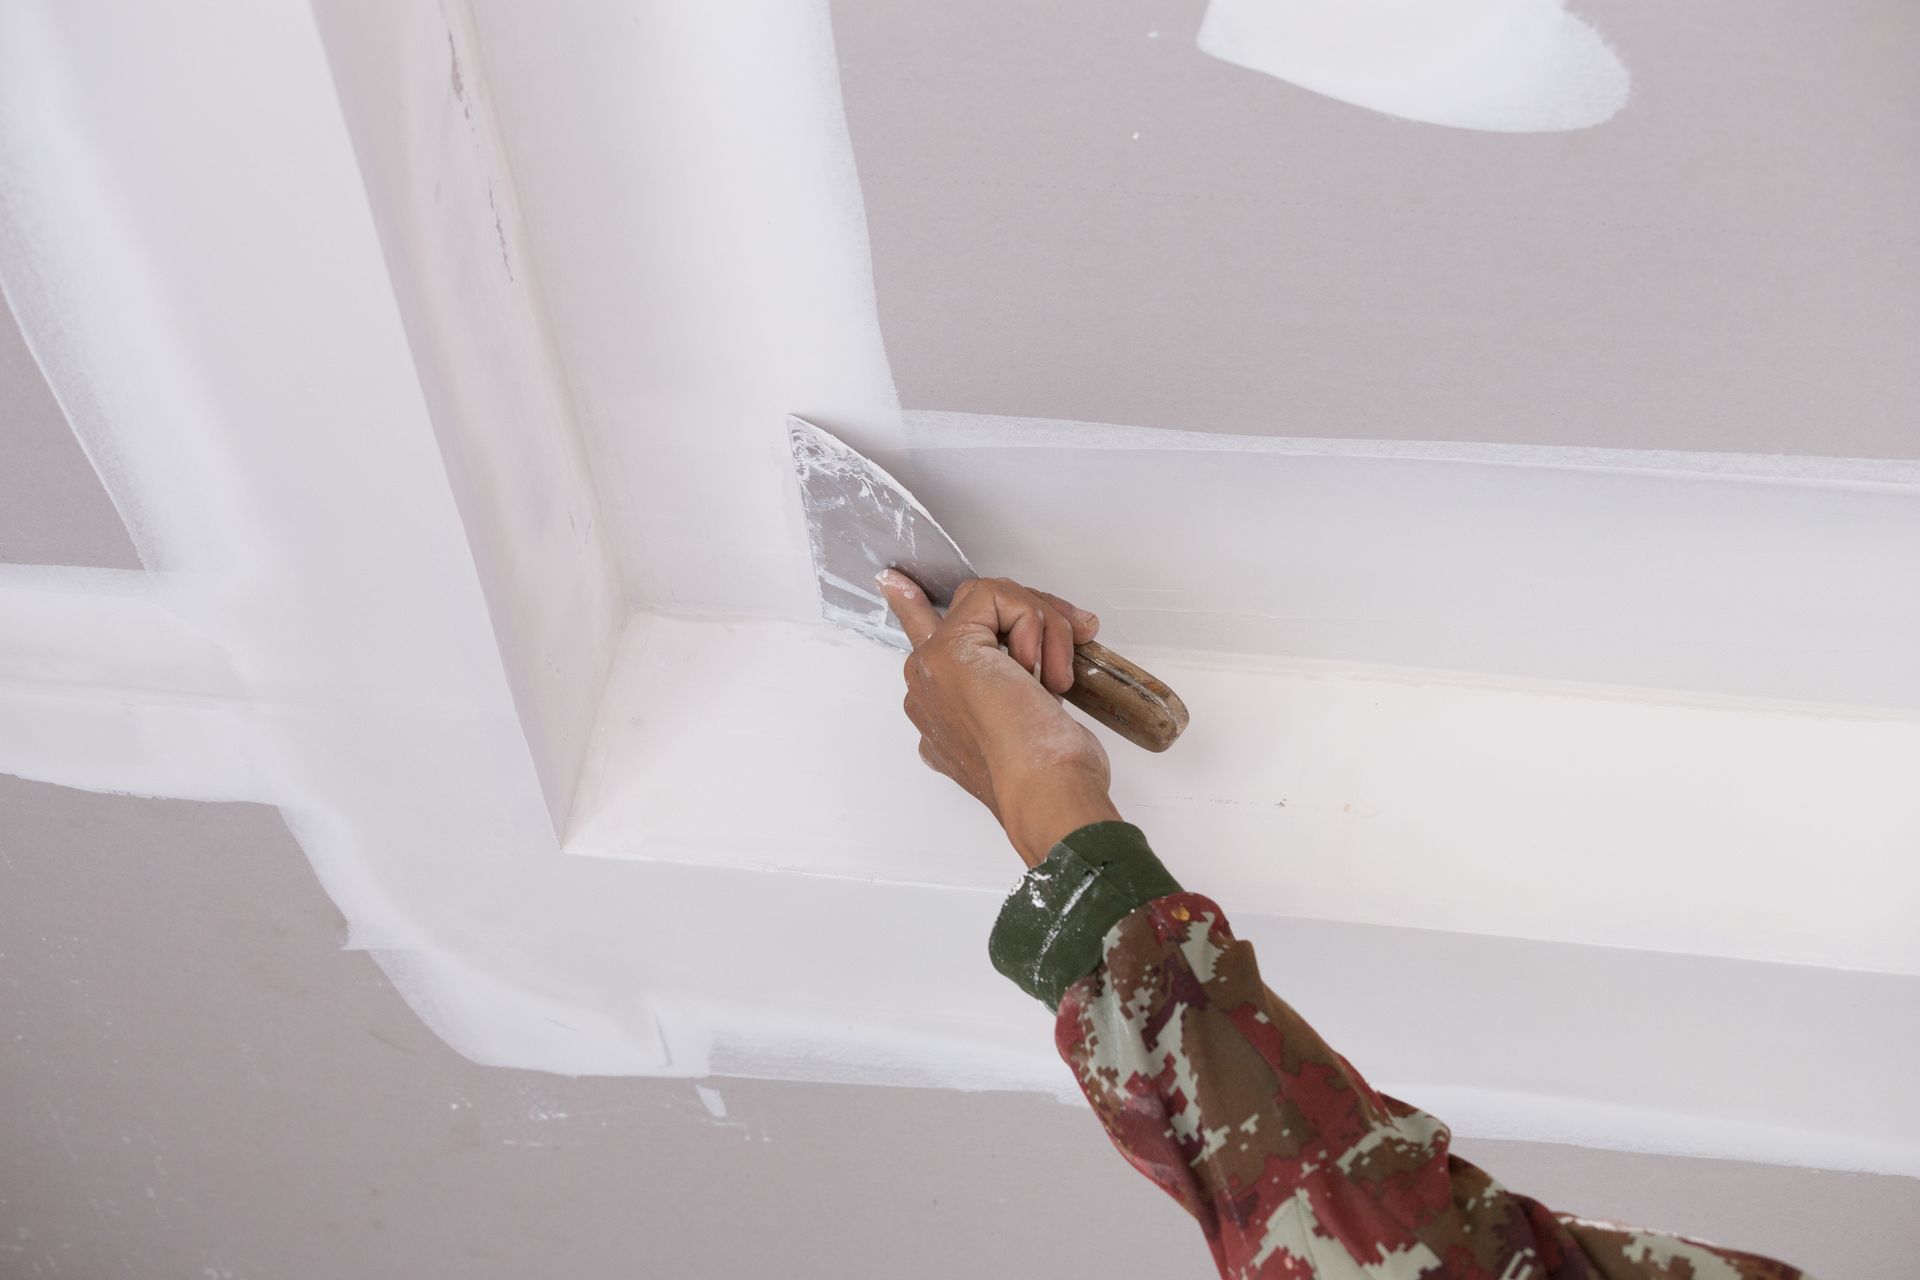 Close-up of a worker's hand applying gypsum plaster to drywall ceiling joints using spackle, ensuring a smooth and seamless finish.